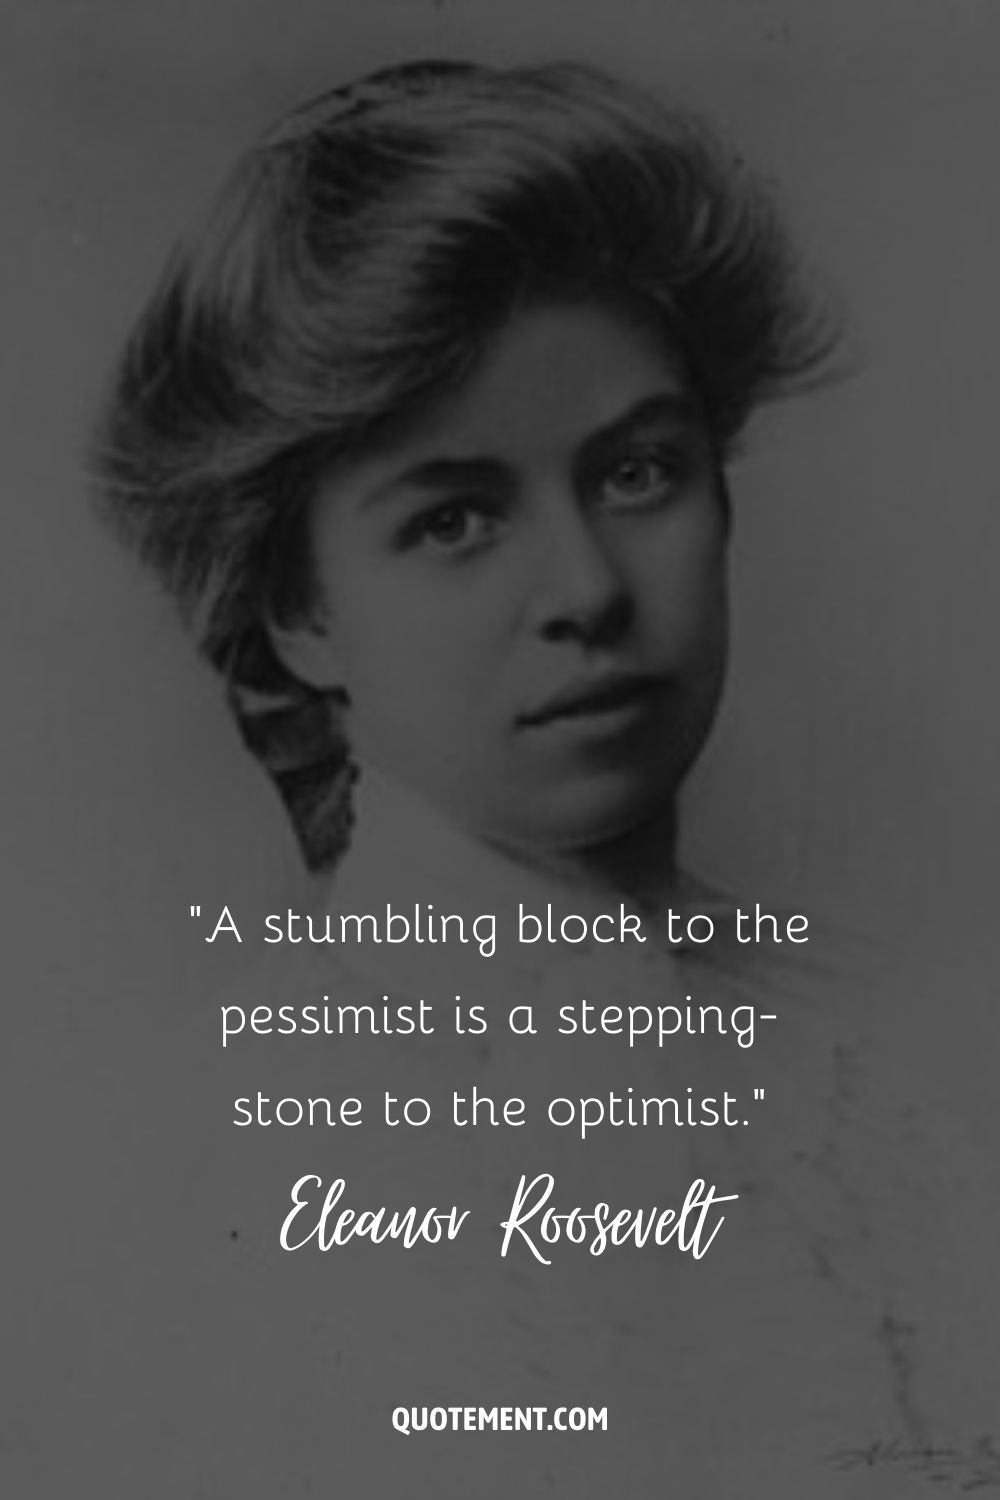 A stumbling block to the pessimist is a stepping-stone to the optimist.